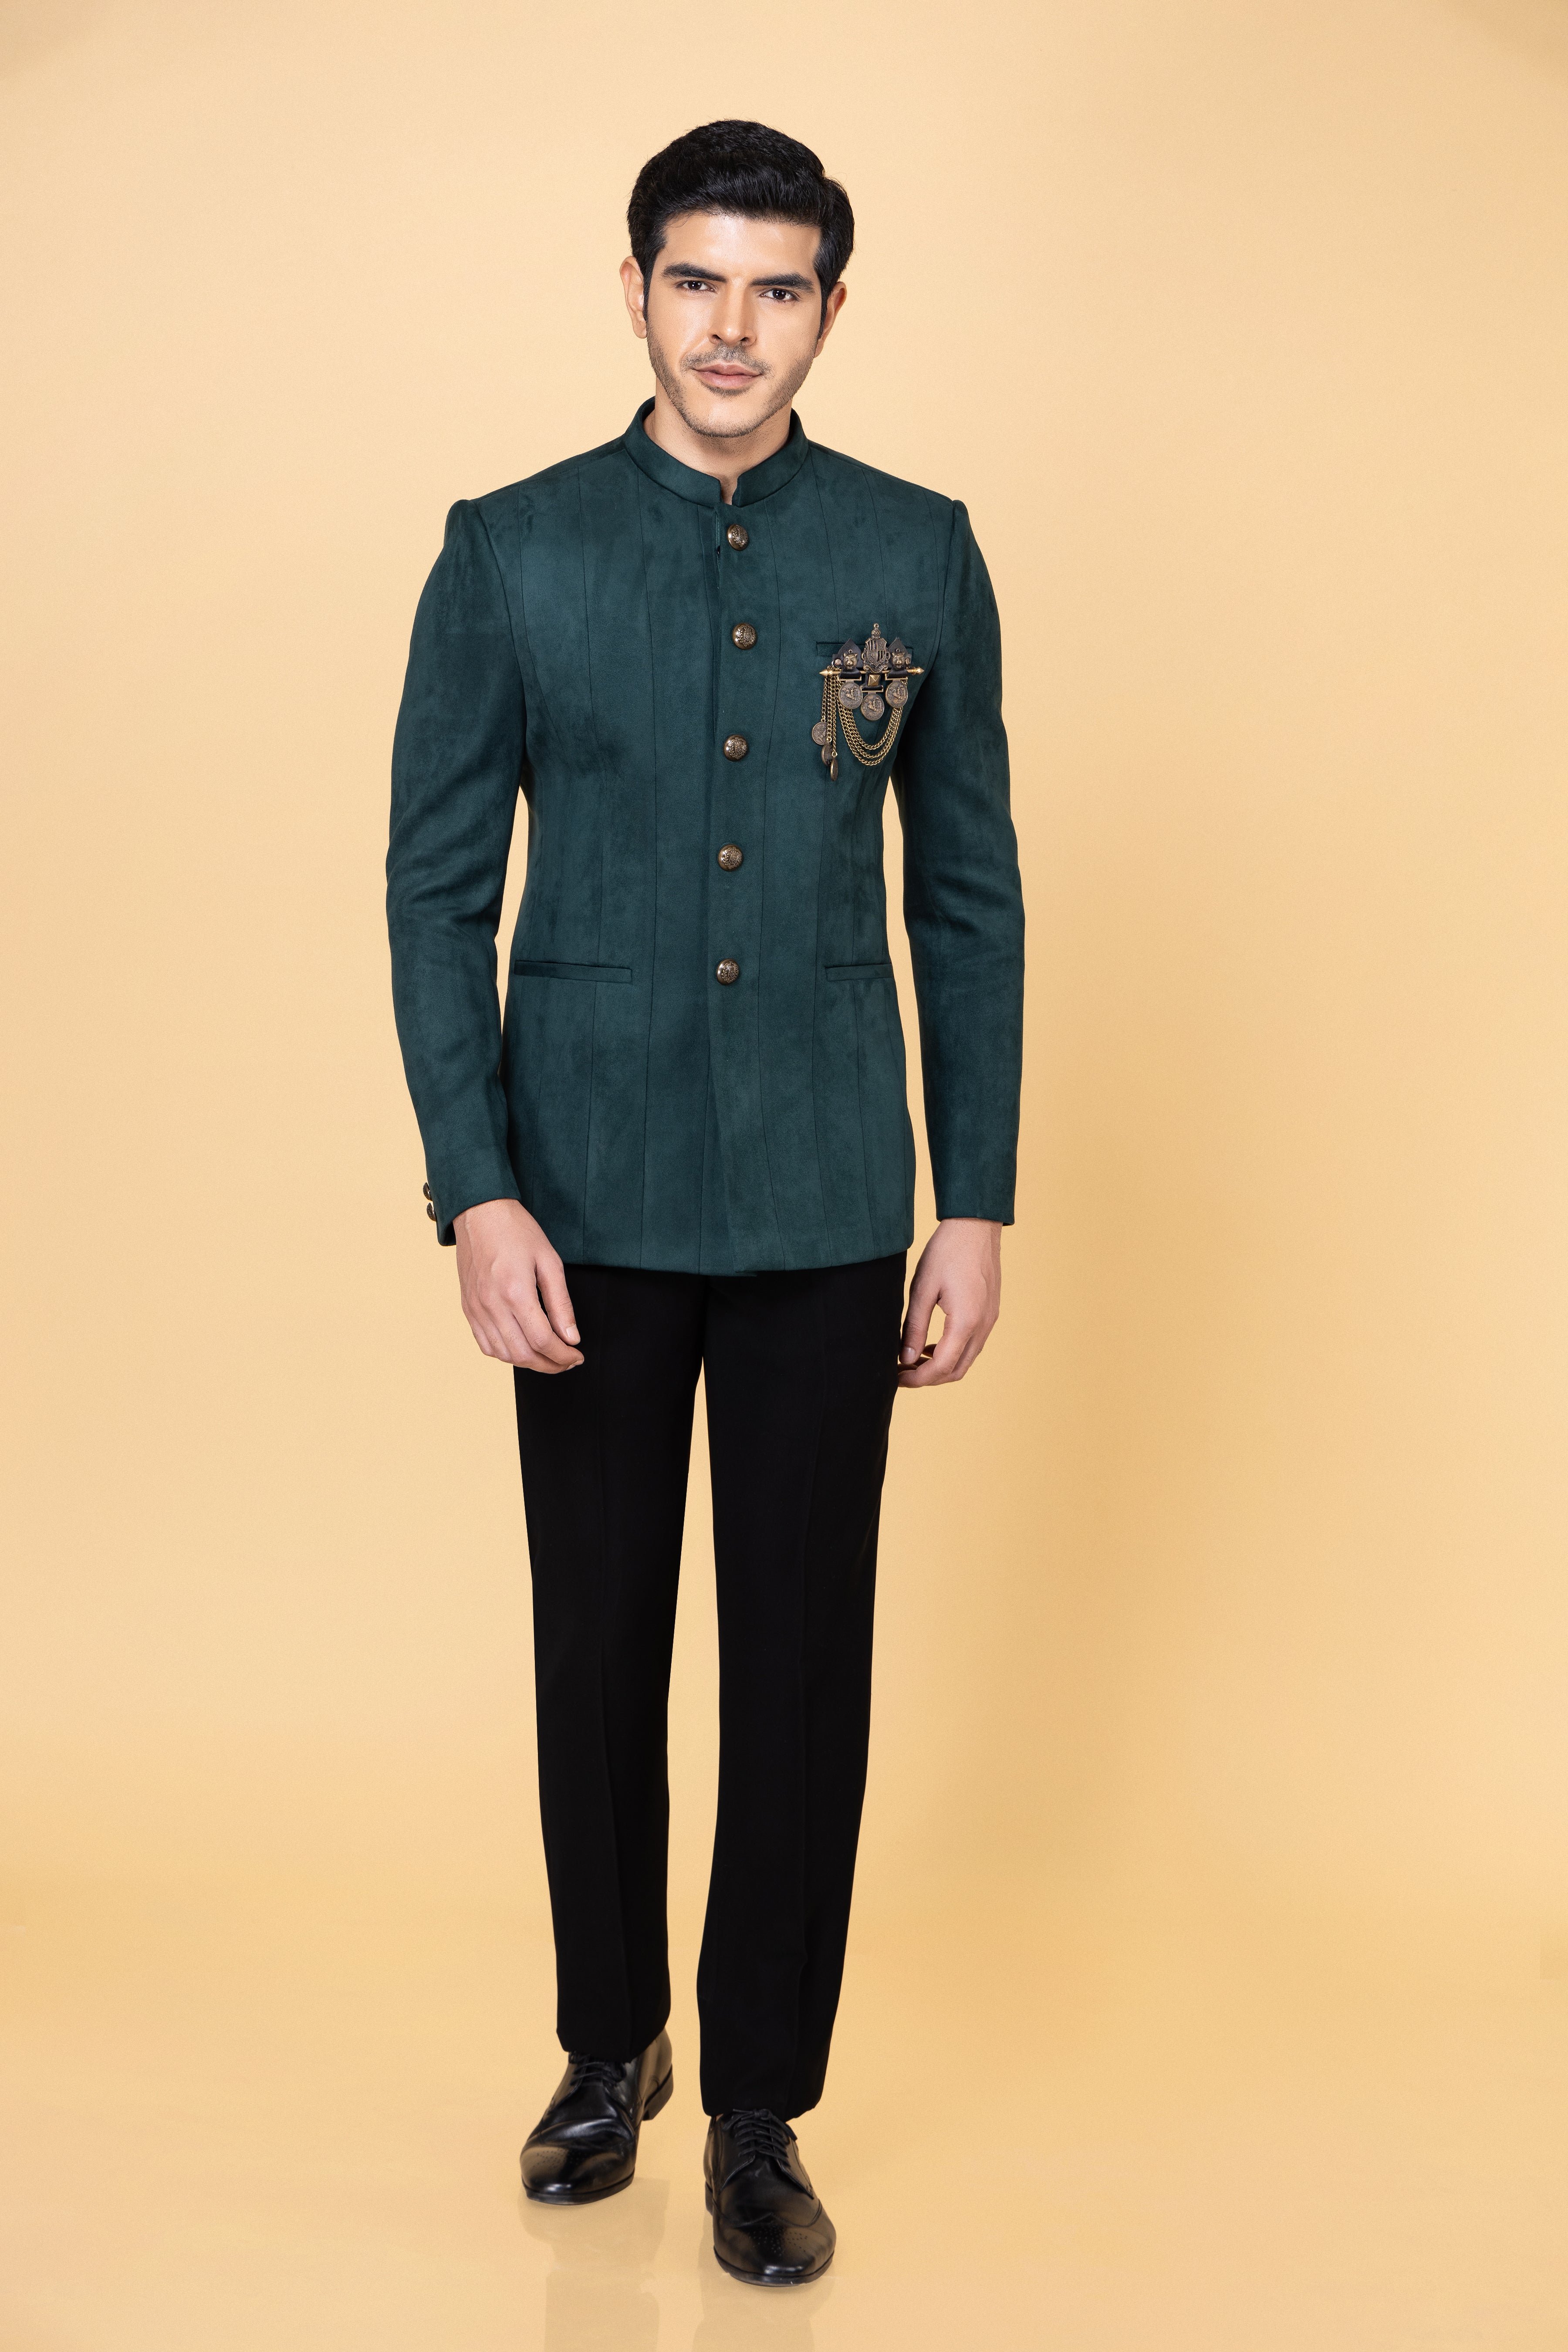 15 New And Latest Pathani Suit Styles For Grooms For Indian Wedding